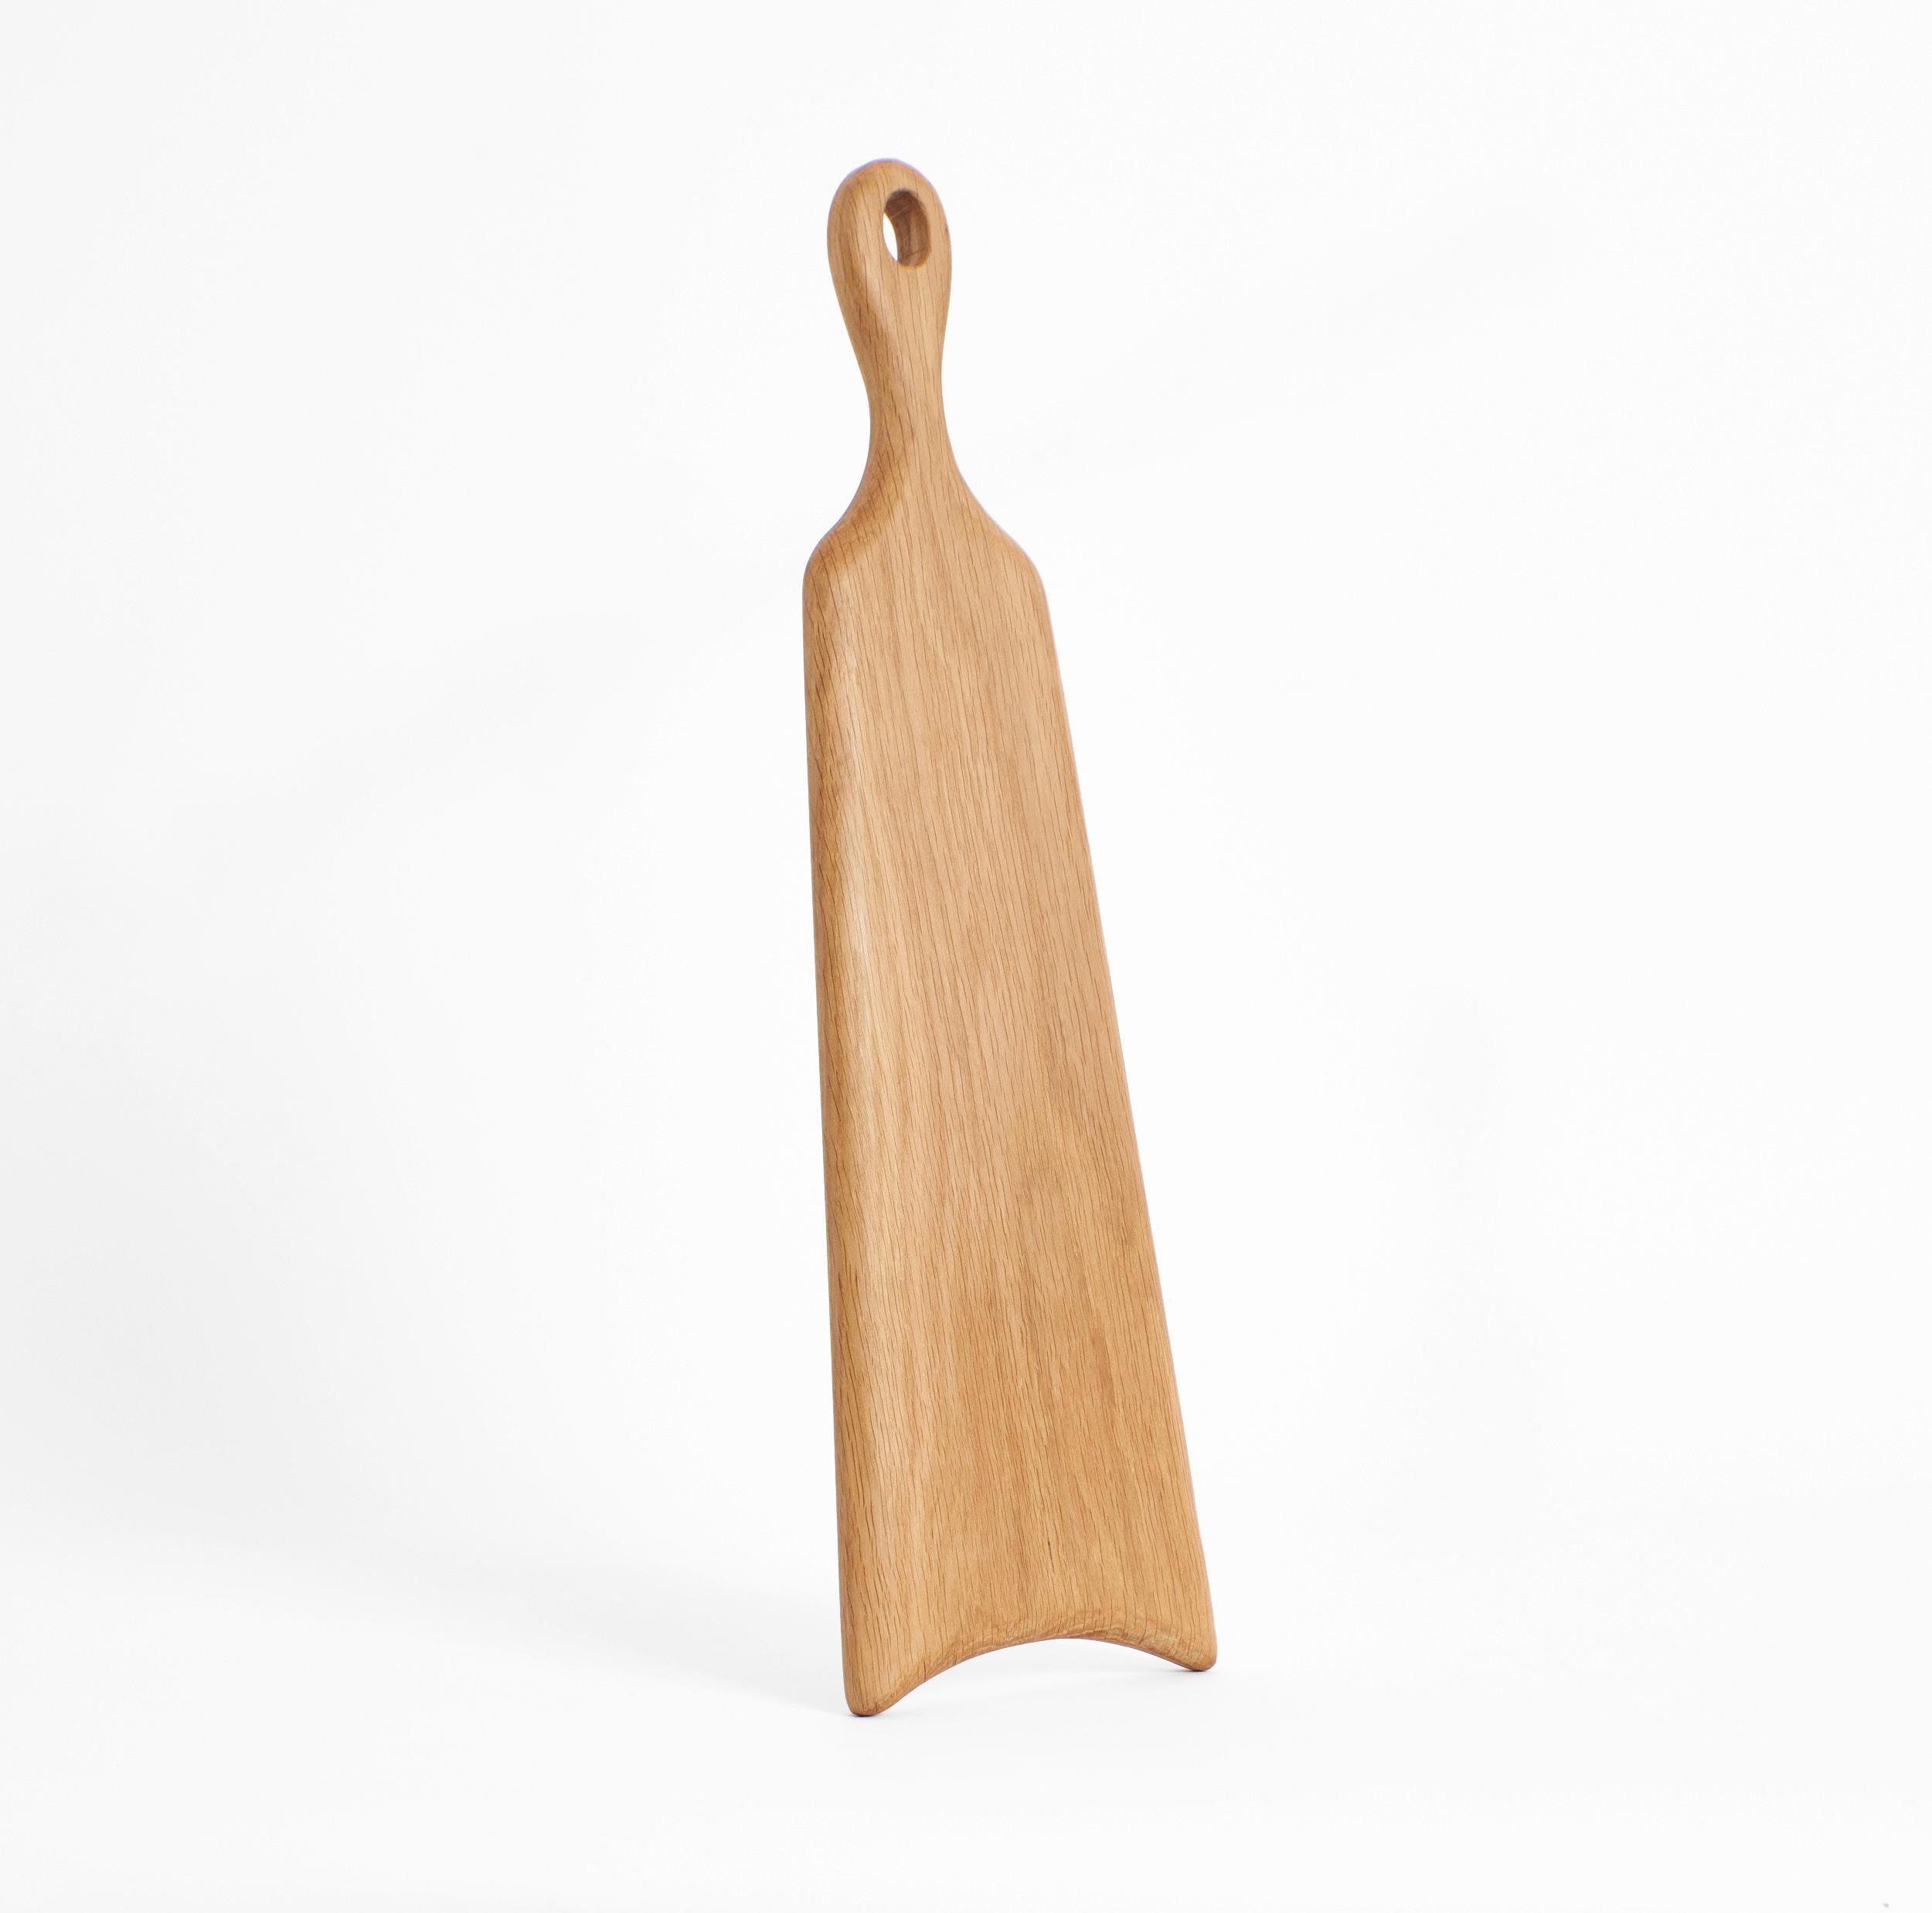 Designed by Project 213A in 2022


Set of 4 hand-carved Wooden Boards
The family of boards are hand-carved from walnut and oak. The boards will become a key item in every kitchen being decorative as well as functional. Four distinctive shapes